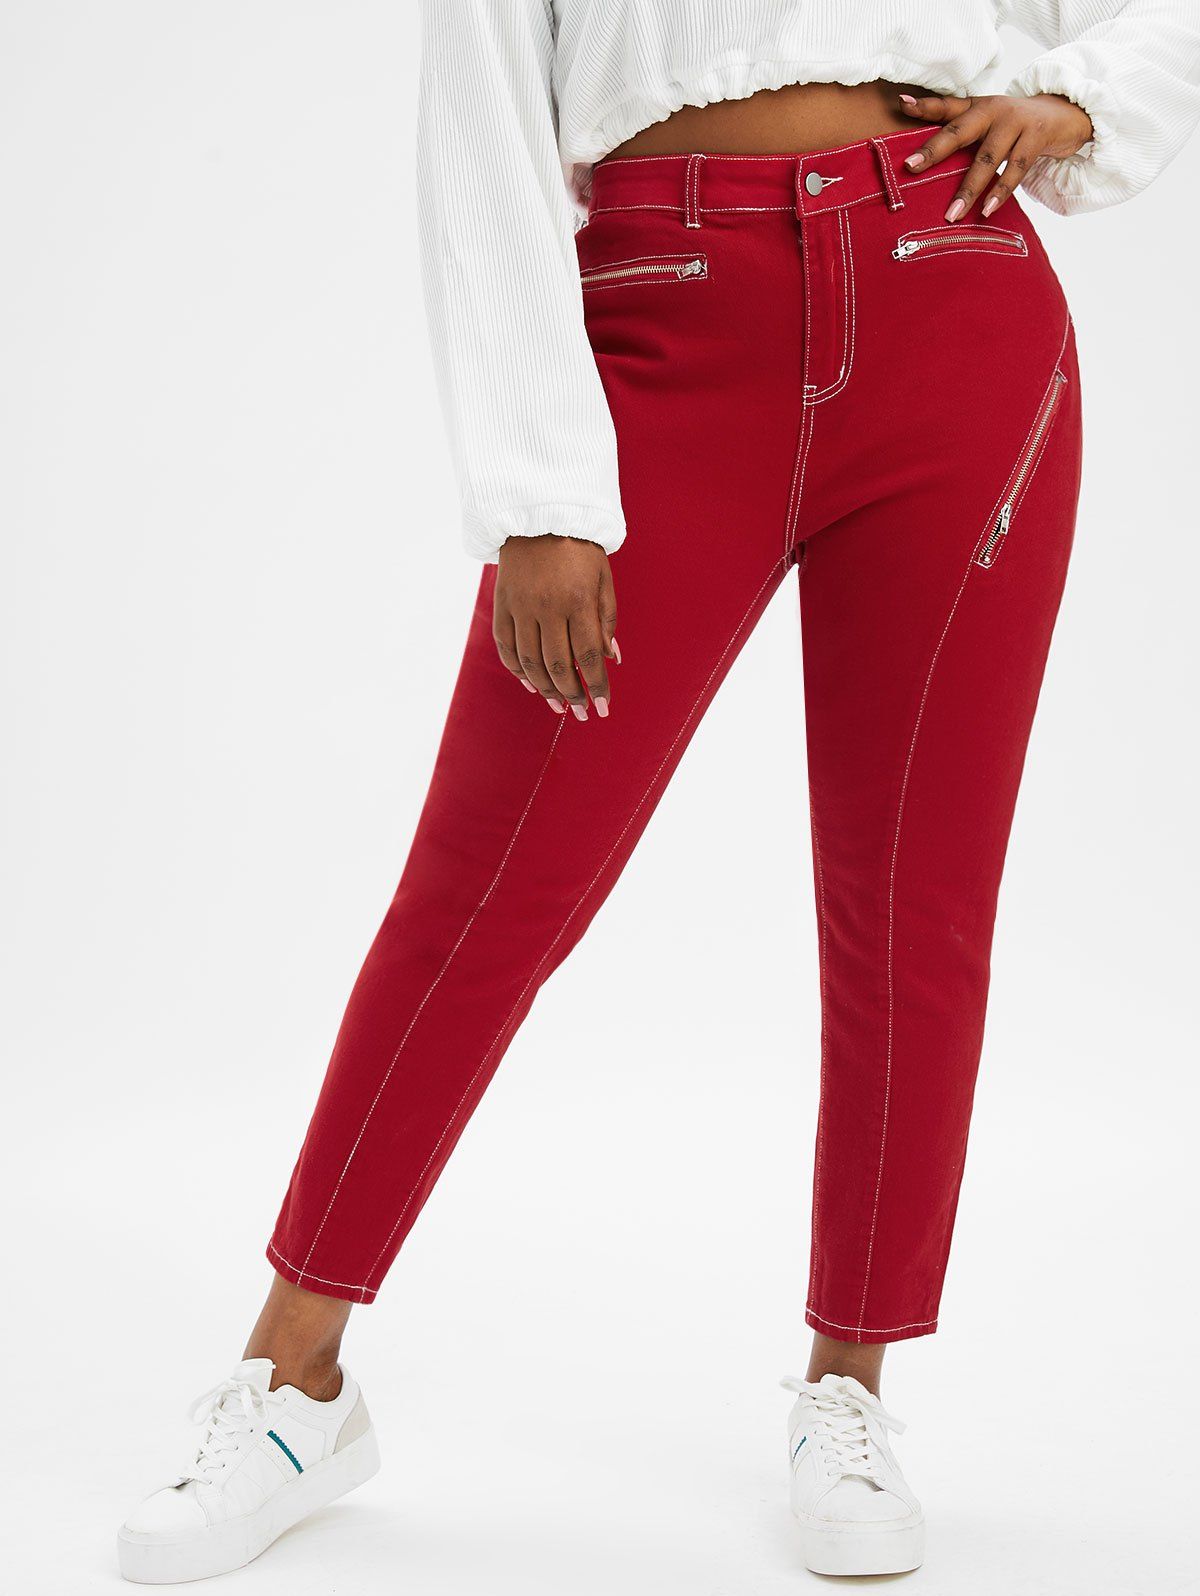 Zippered Front Topstitching Plus Size Skinny Jeans - RED 5X